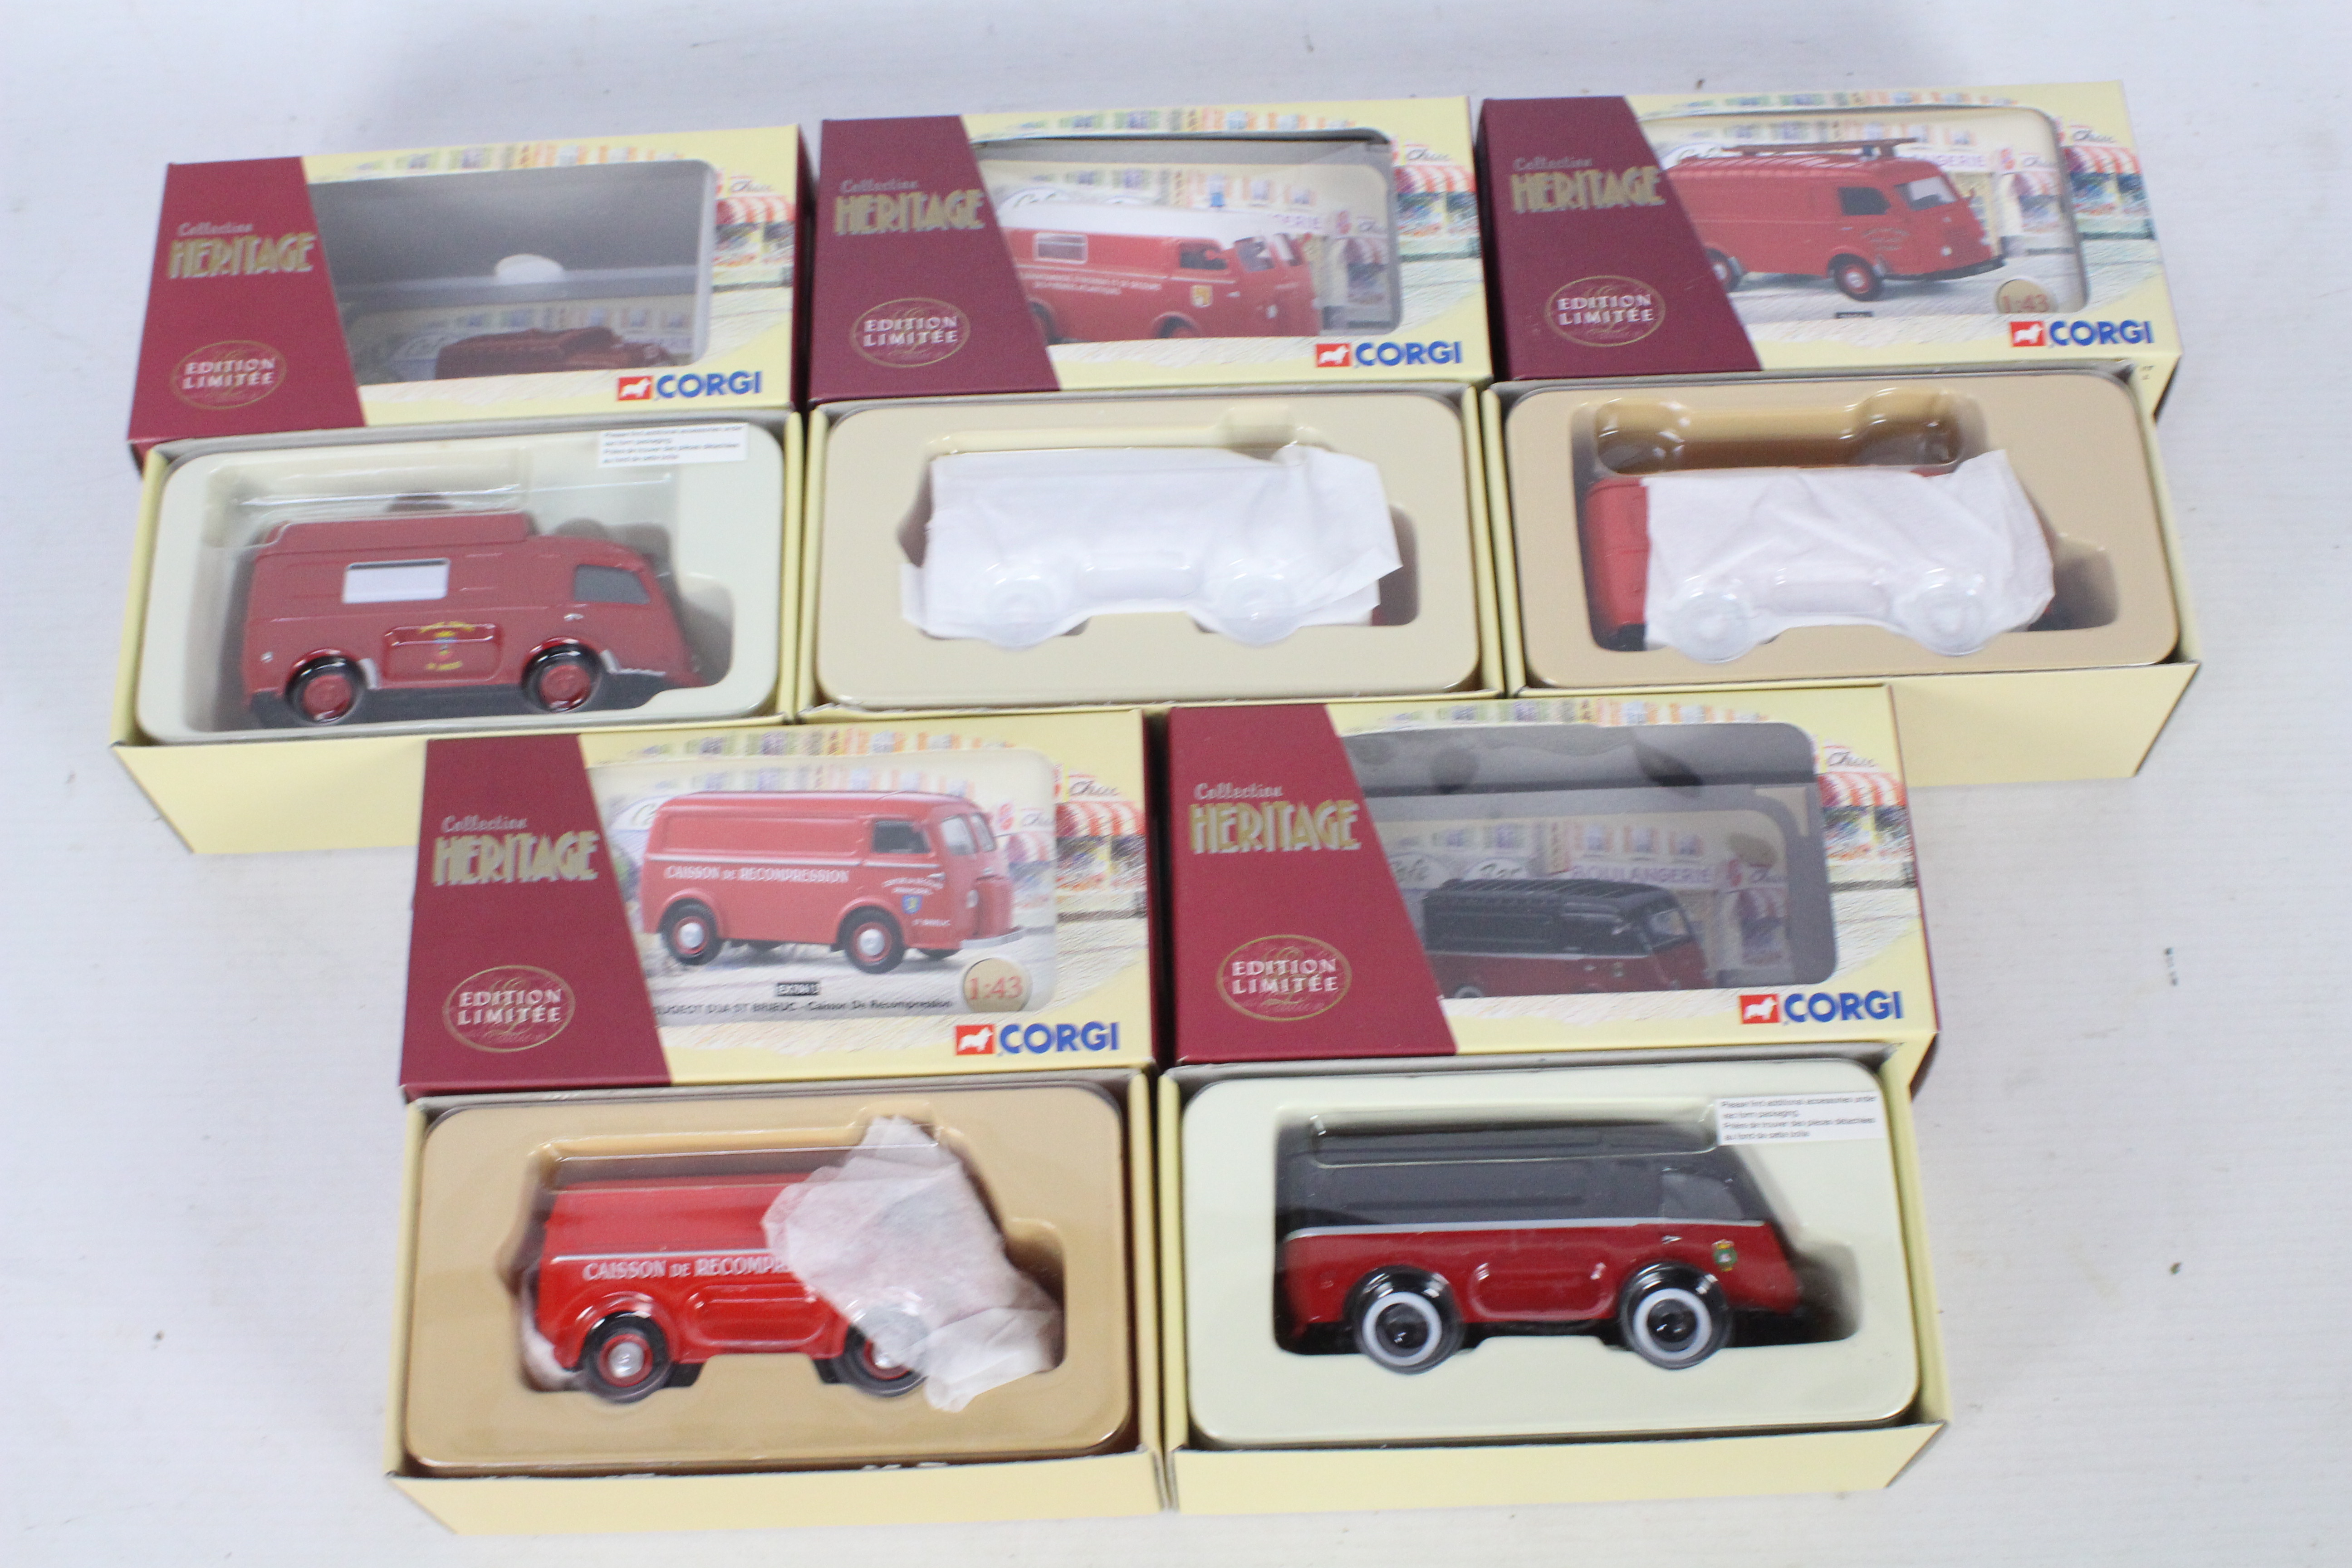 Corgi - Five boxed Limited Edition Fire related diecast models from the Corgi Heritage Collection